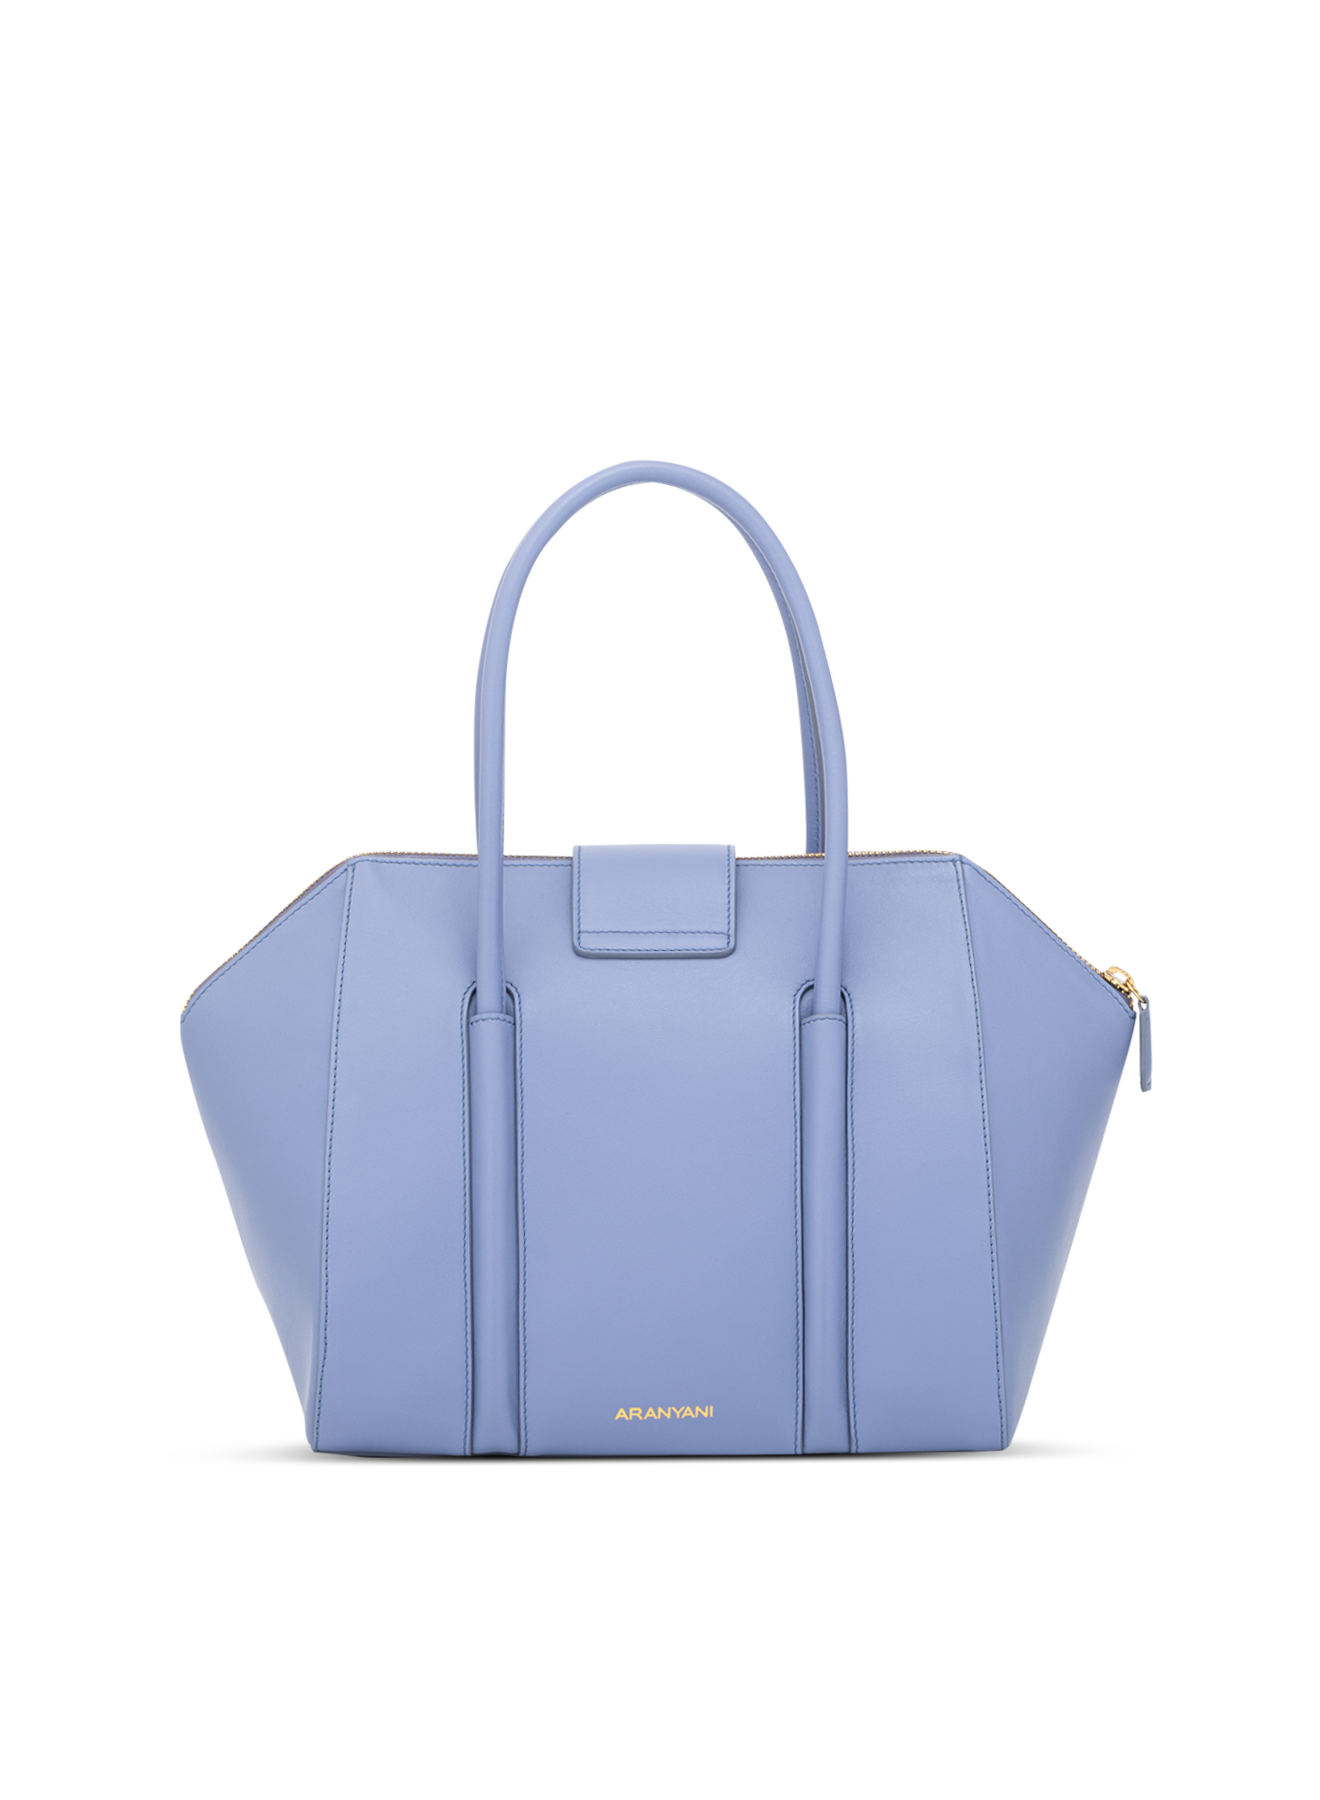 Tranquil Blue / Finest Calf Napa Leather